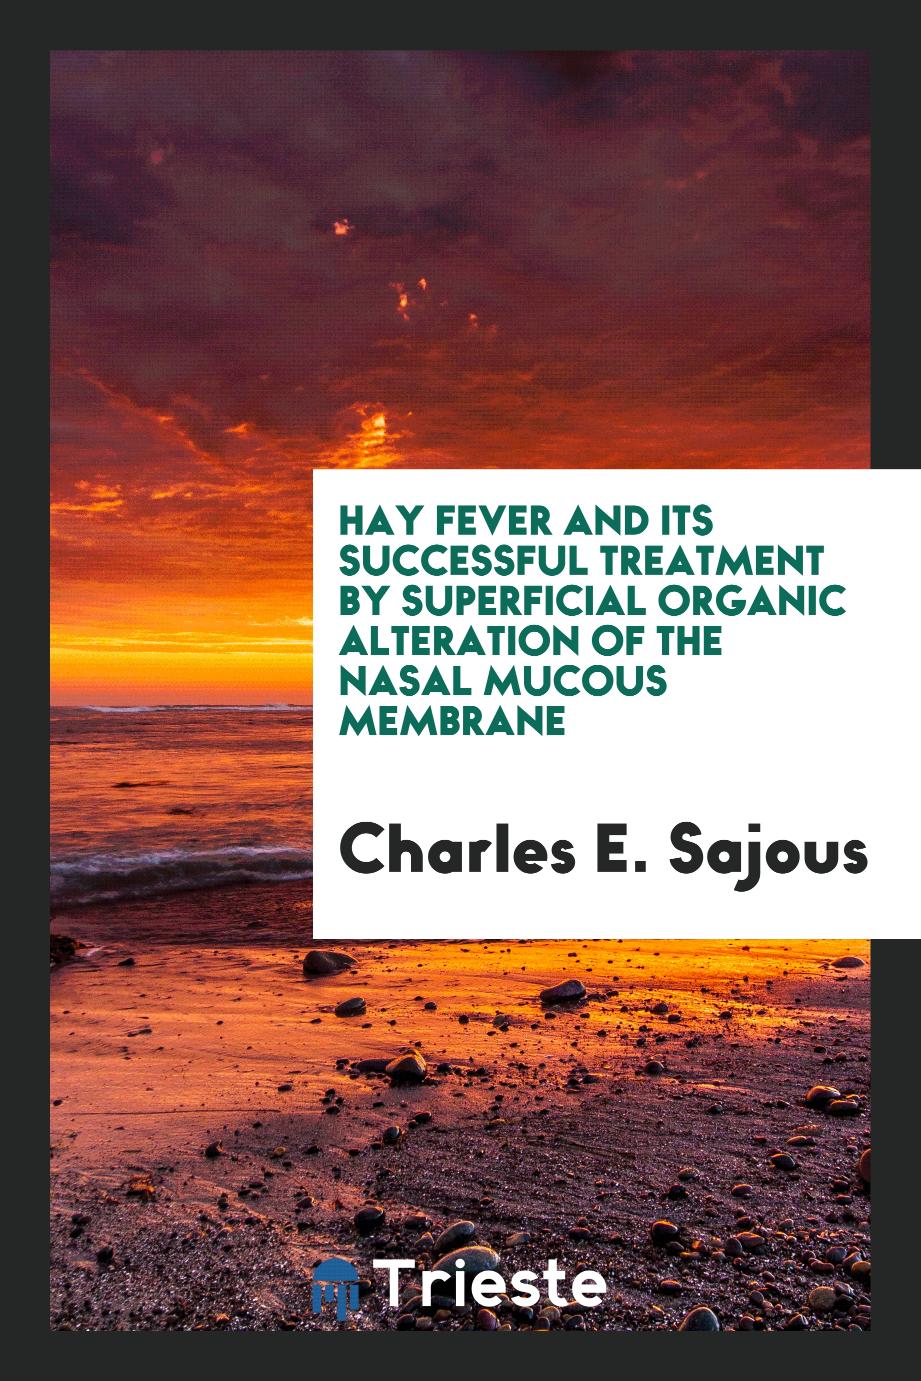 Hay Fever and Its Successful Treatment by Superficial Organic Alteration of the Nasal Mucous Membrane